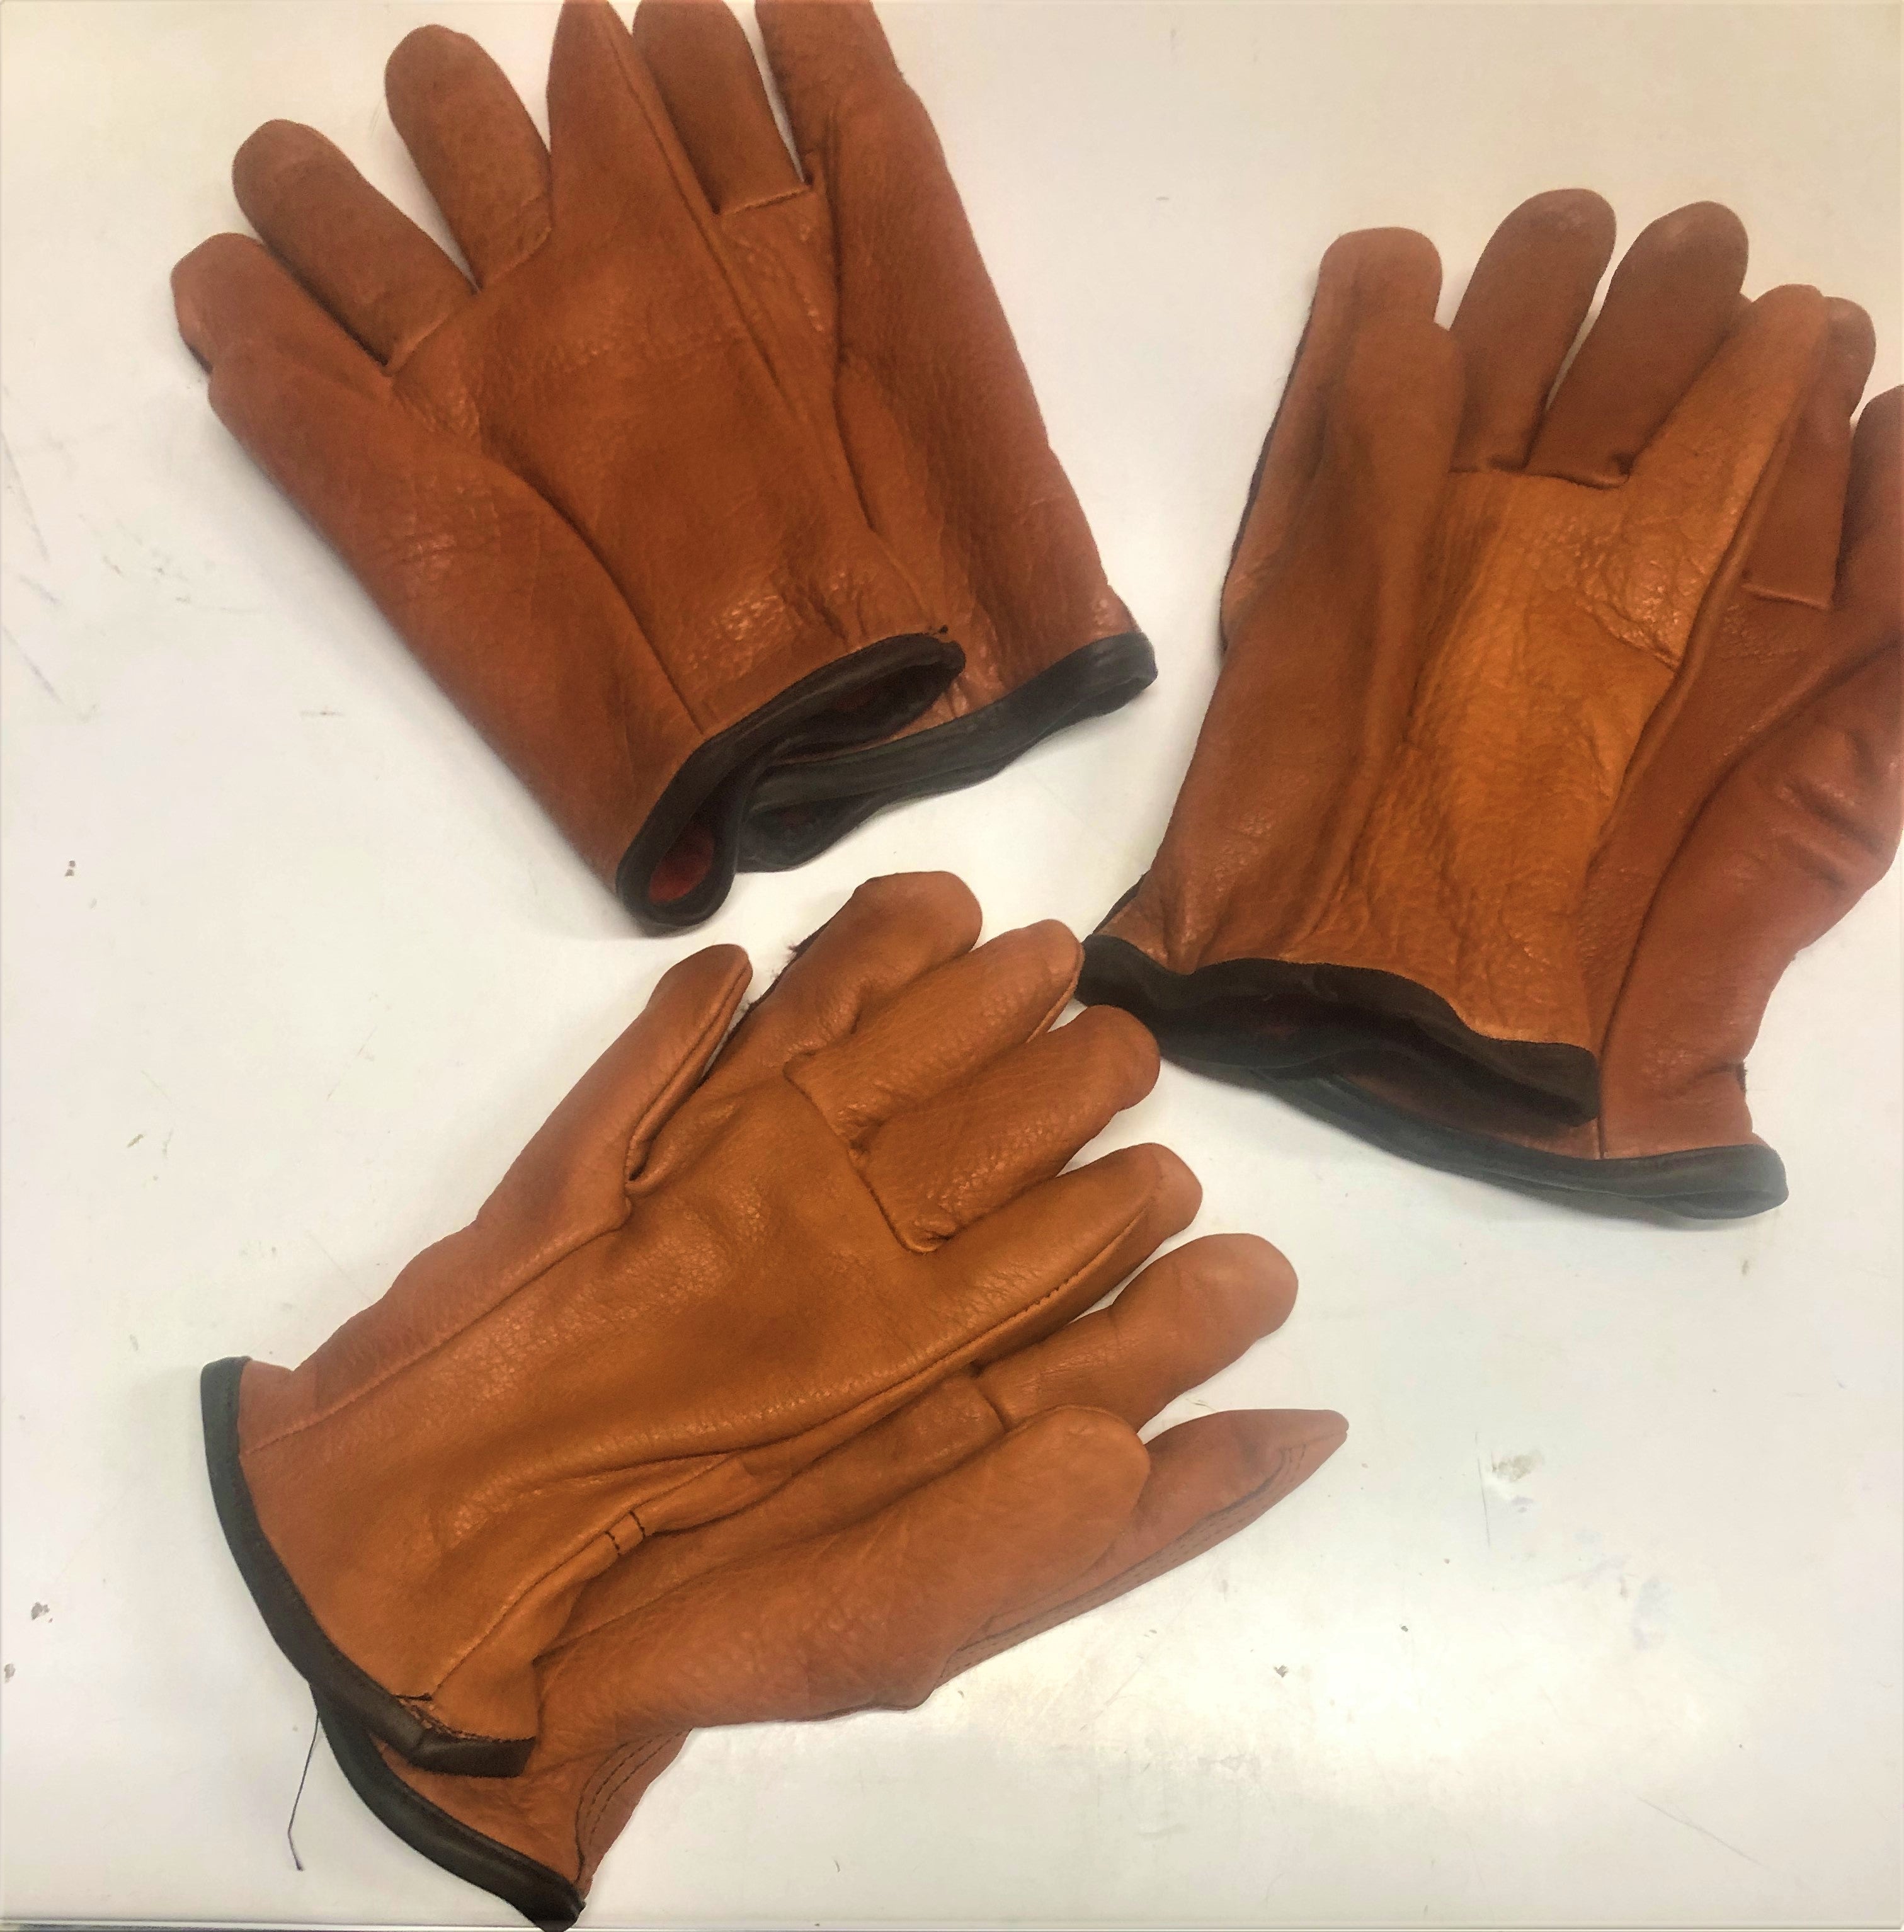 At Auction: 2 Pair of Firm Grip Work Gloves